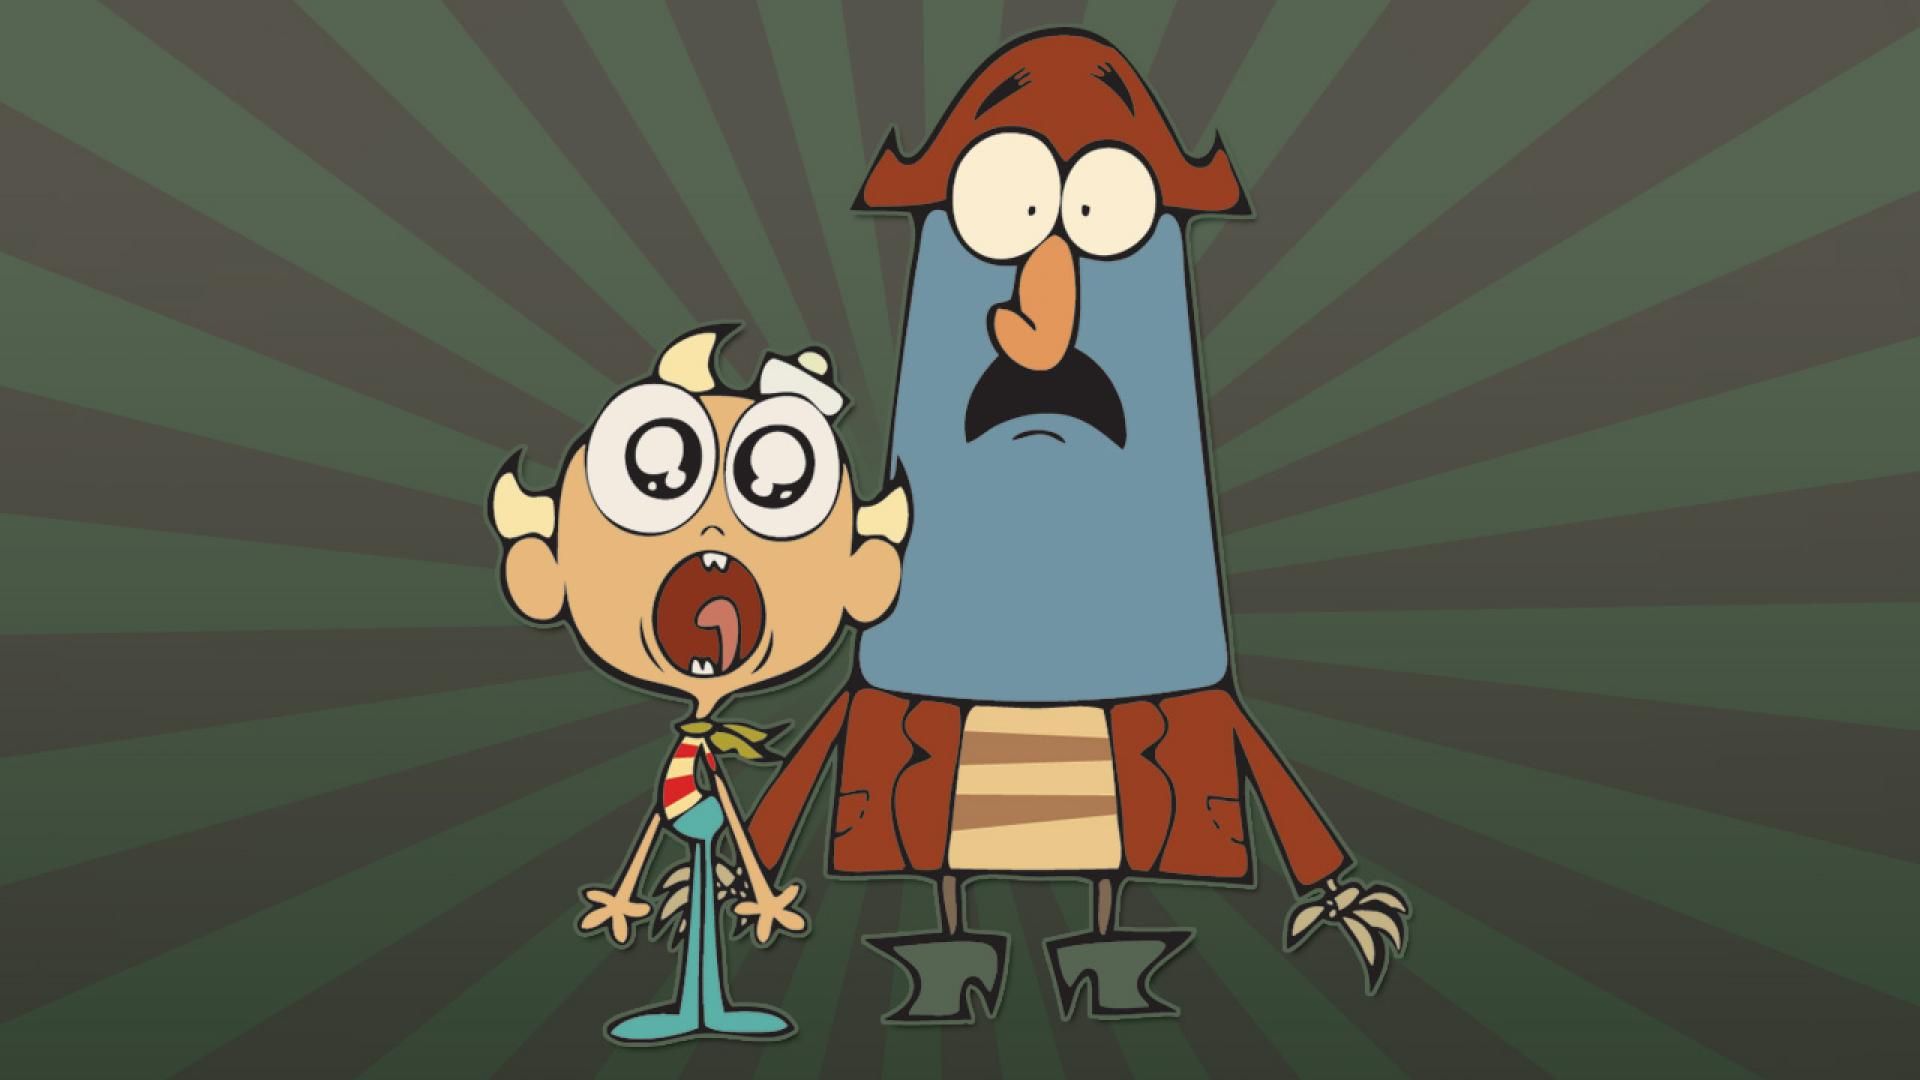 Flapjack cartoons wallpaper - - High Quality and other